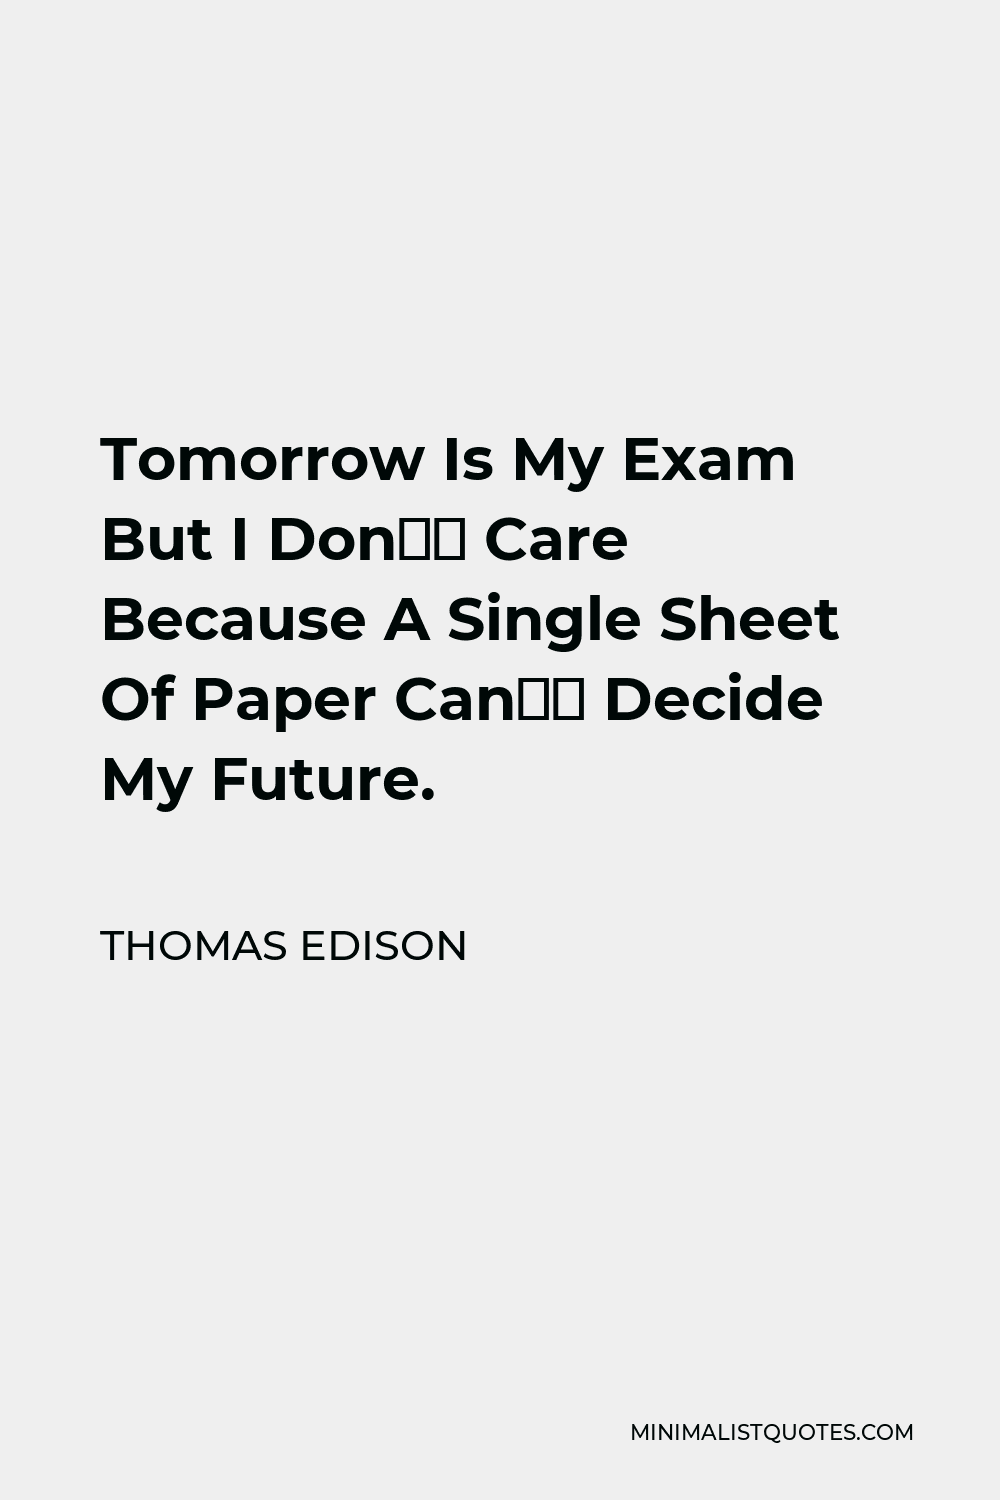 Thomas Edison Quote - Tomorrow Is My Exam But I Don’t Care Because A Single Sheet Of Paper Can’t Decide My Future.